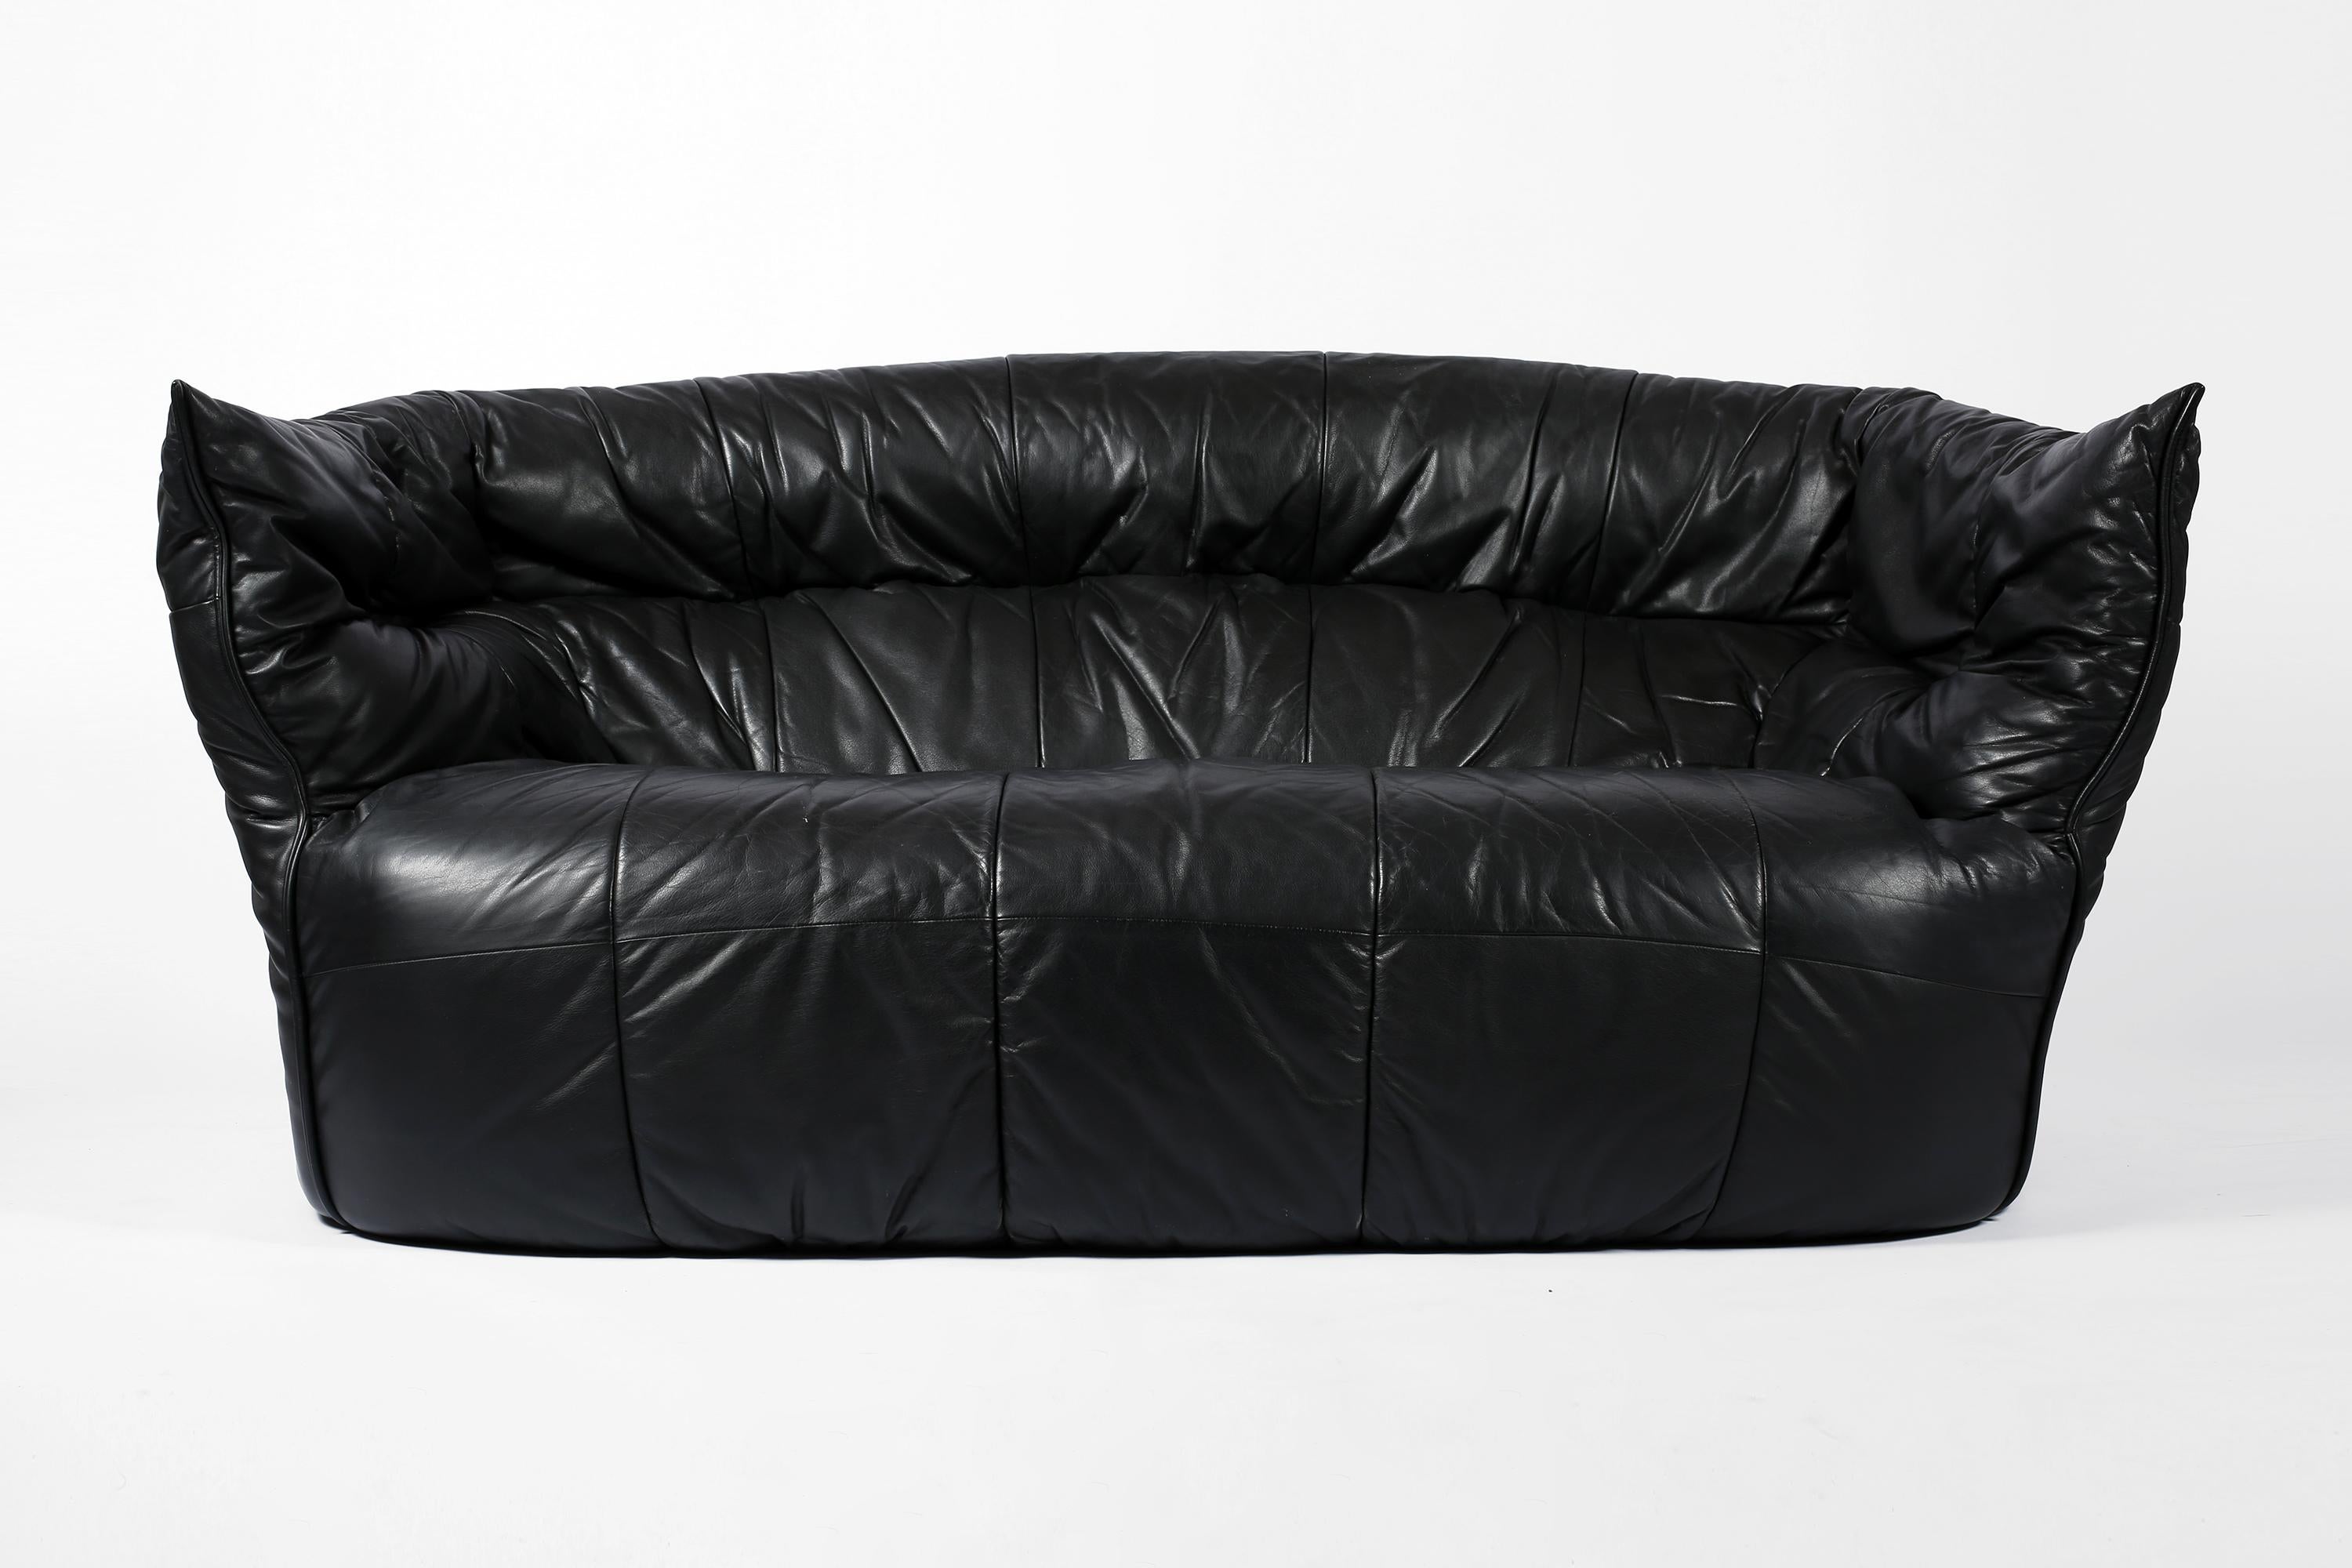 A perfectly patinated black leather two-seater ‘Brigantin’ sofa, designed by Michel Ducaroy for Ligne Roset. French, c. 1980.